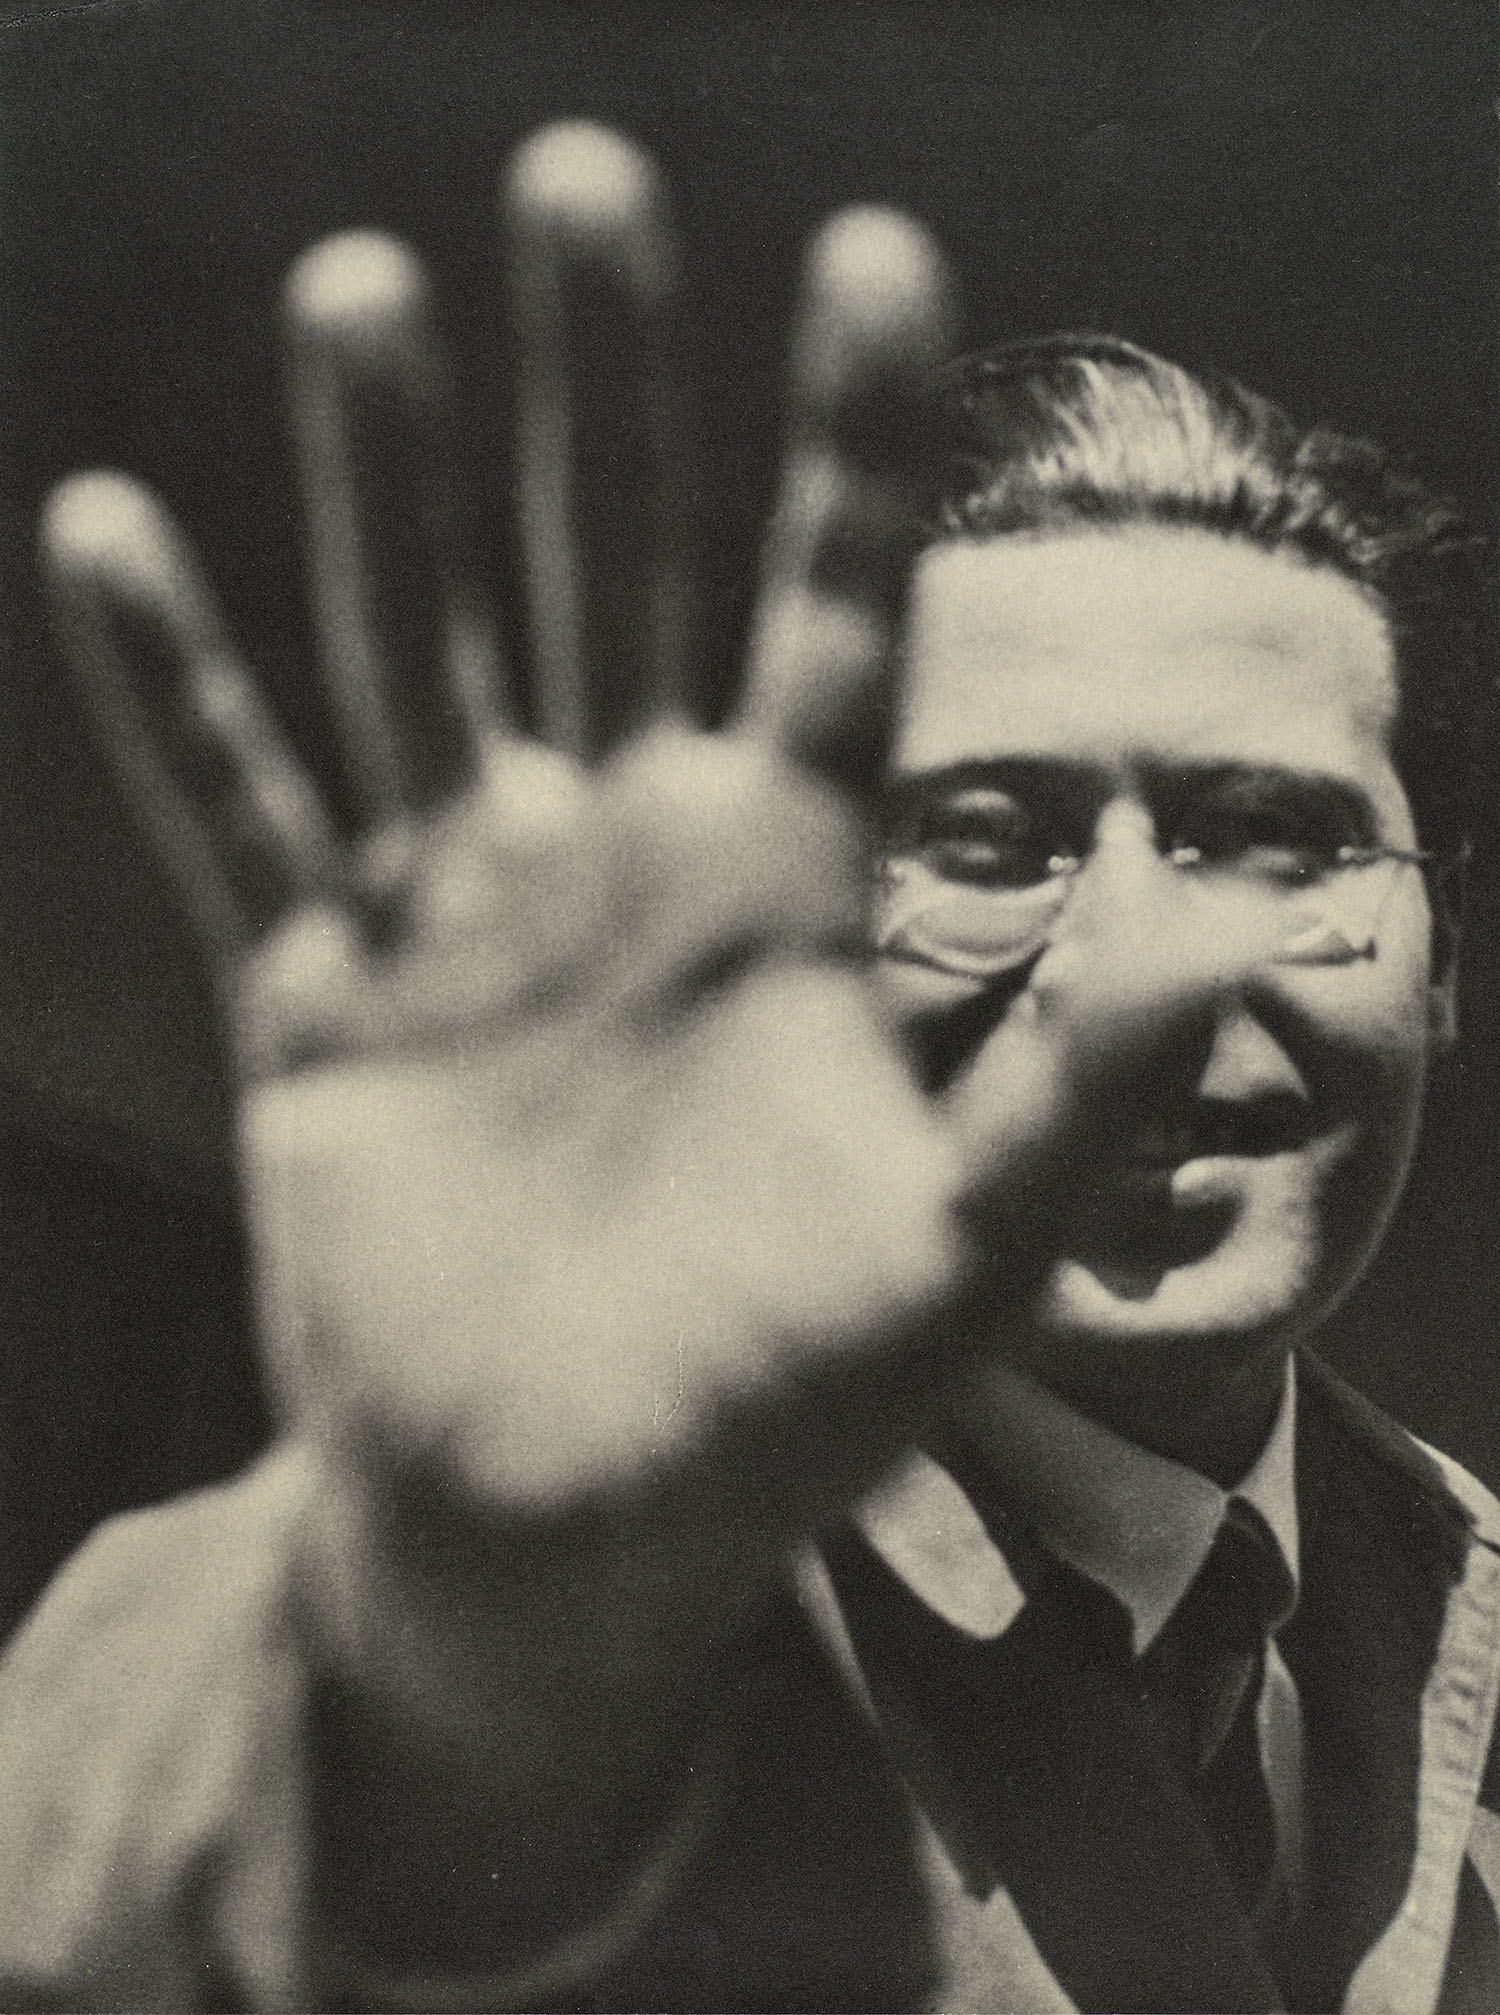 László Moholy-Nagy, “Photograph (Self-Portrait with Hand),” 1925/29, printed 1940/49. Galerie Berinson, Berlin. © 2016 Hattula Moholy-Nagy/VG Bild-Kunst, Bonn/Artists Rights Society (ARS), New York. Image courtesy the Art Institute of Chicago.